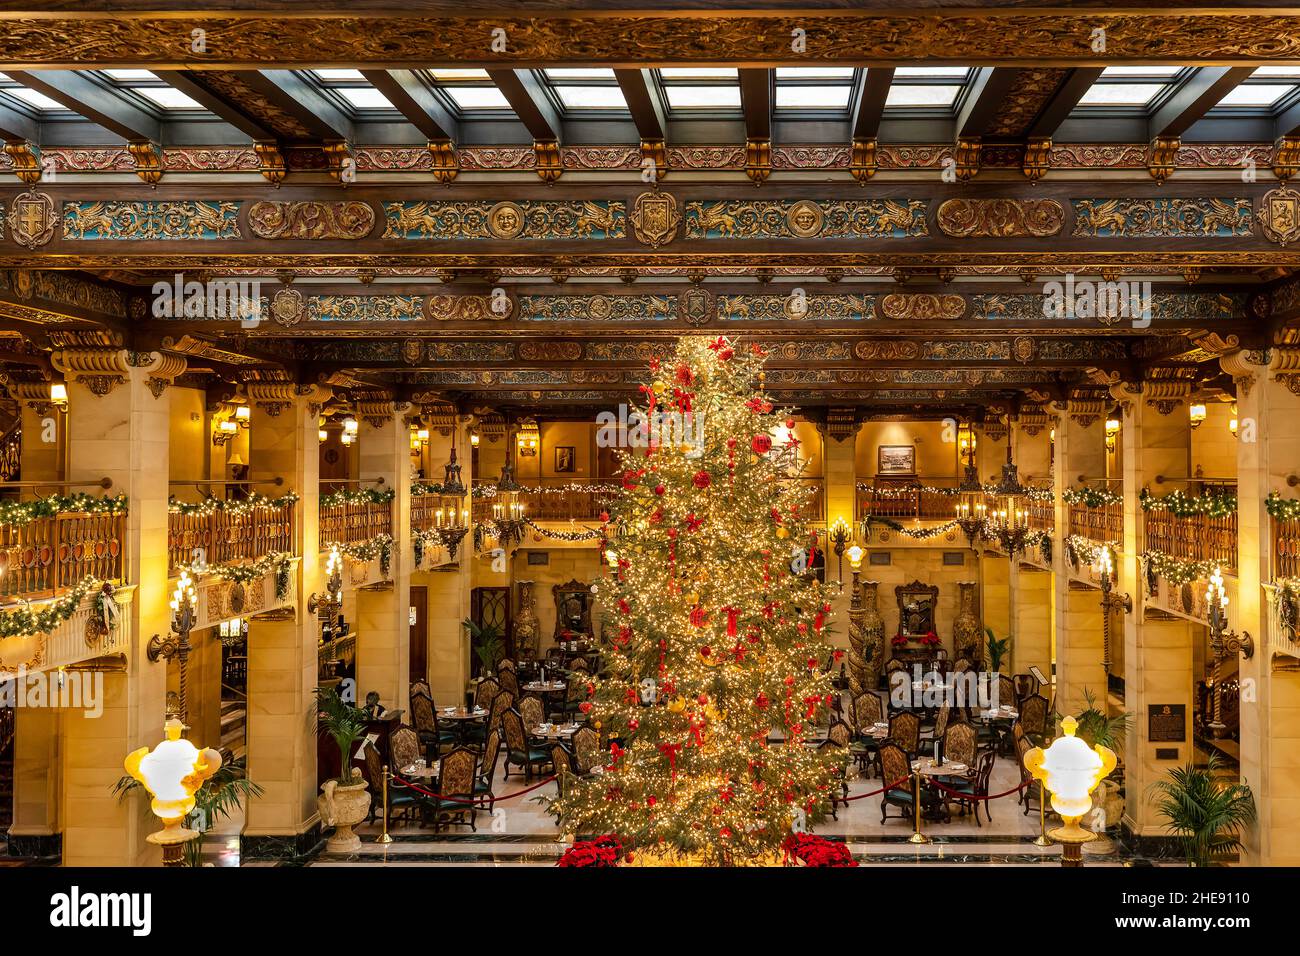 The Lobby of the Historic Davenport Hotel Decorated for Christmas. Stock Photo